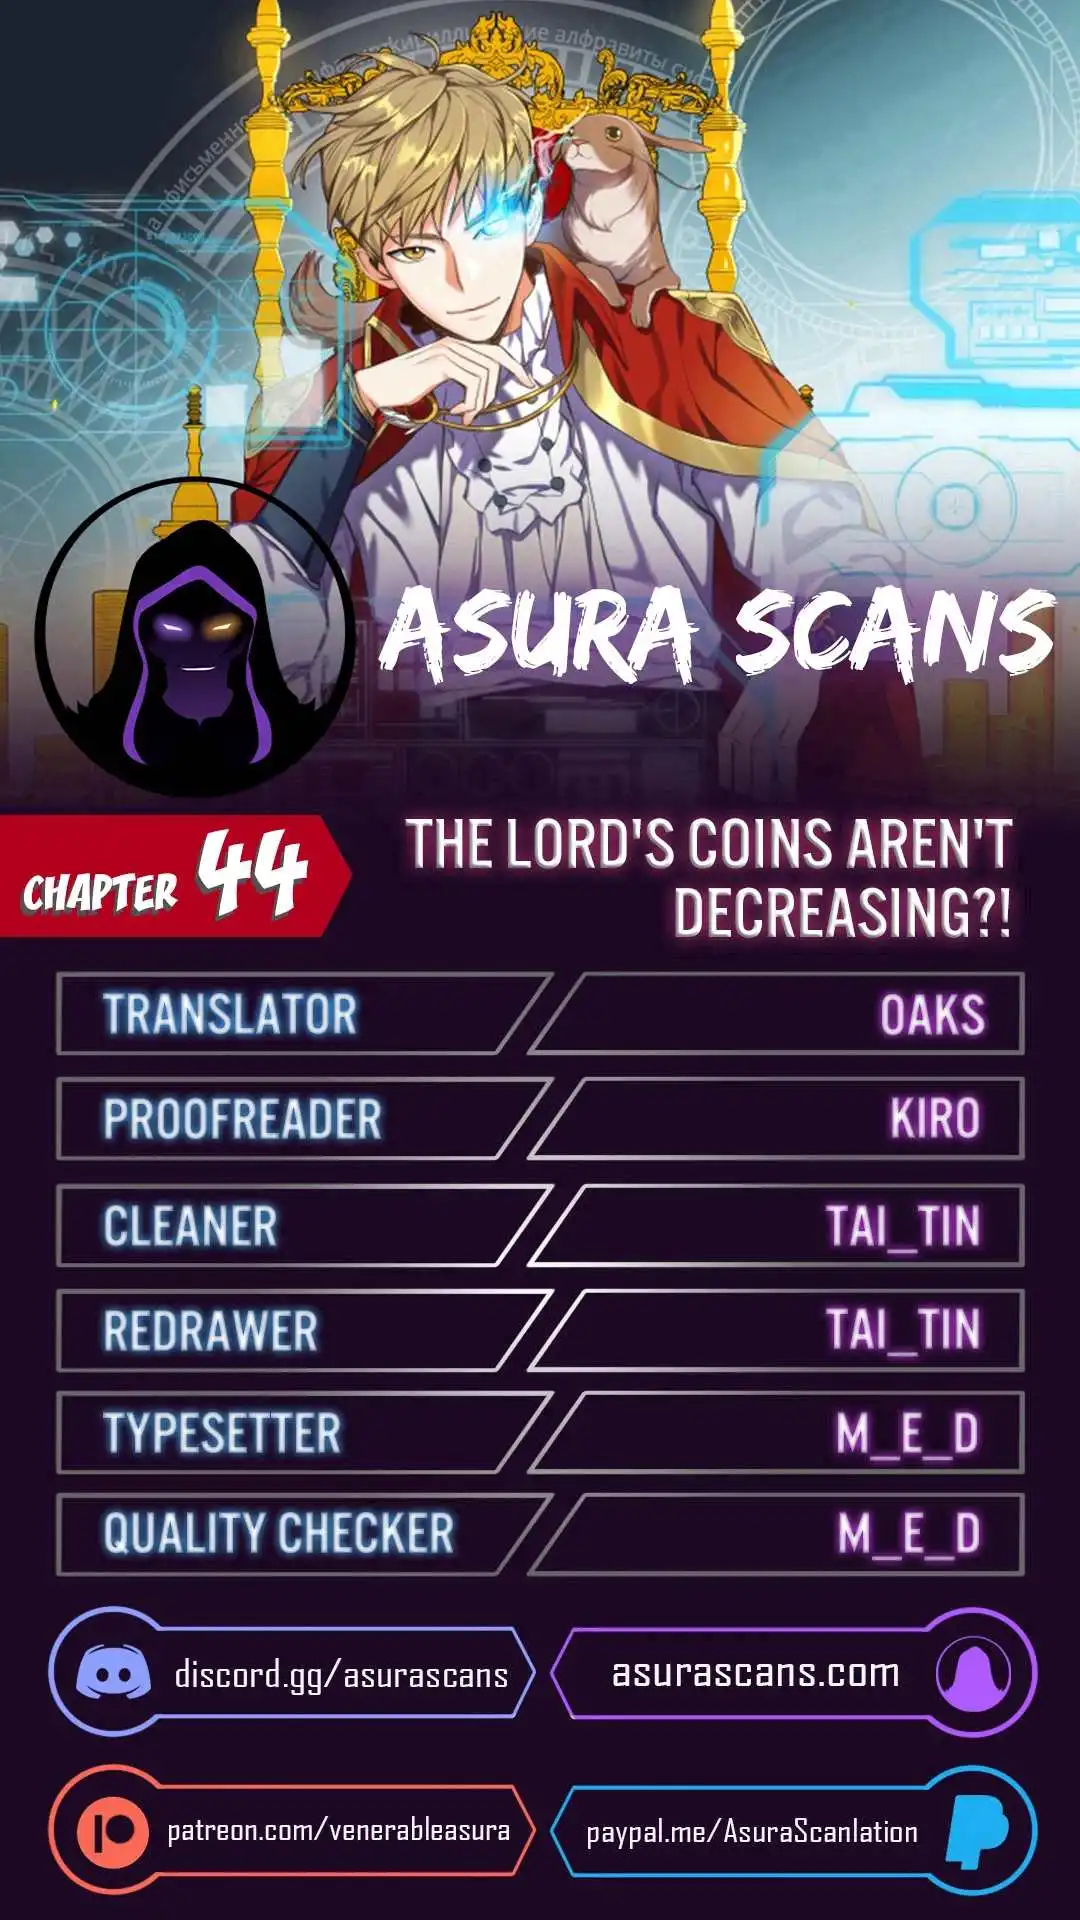 The Lord's Coins Aren't Decreasing?! Chapter 44